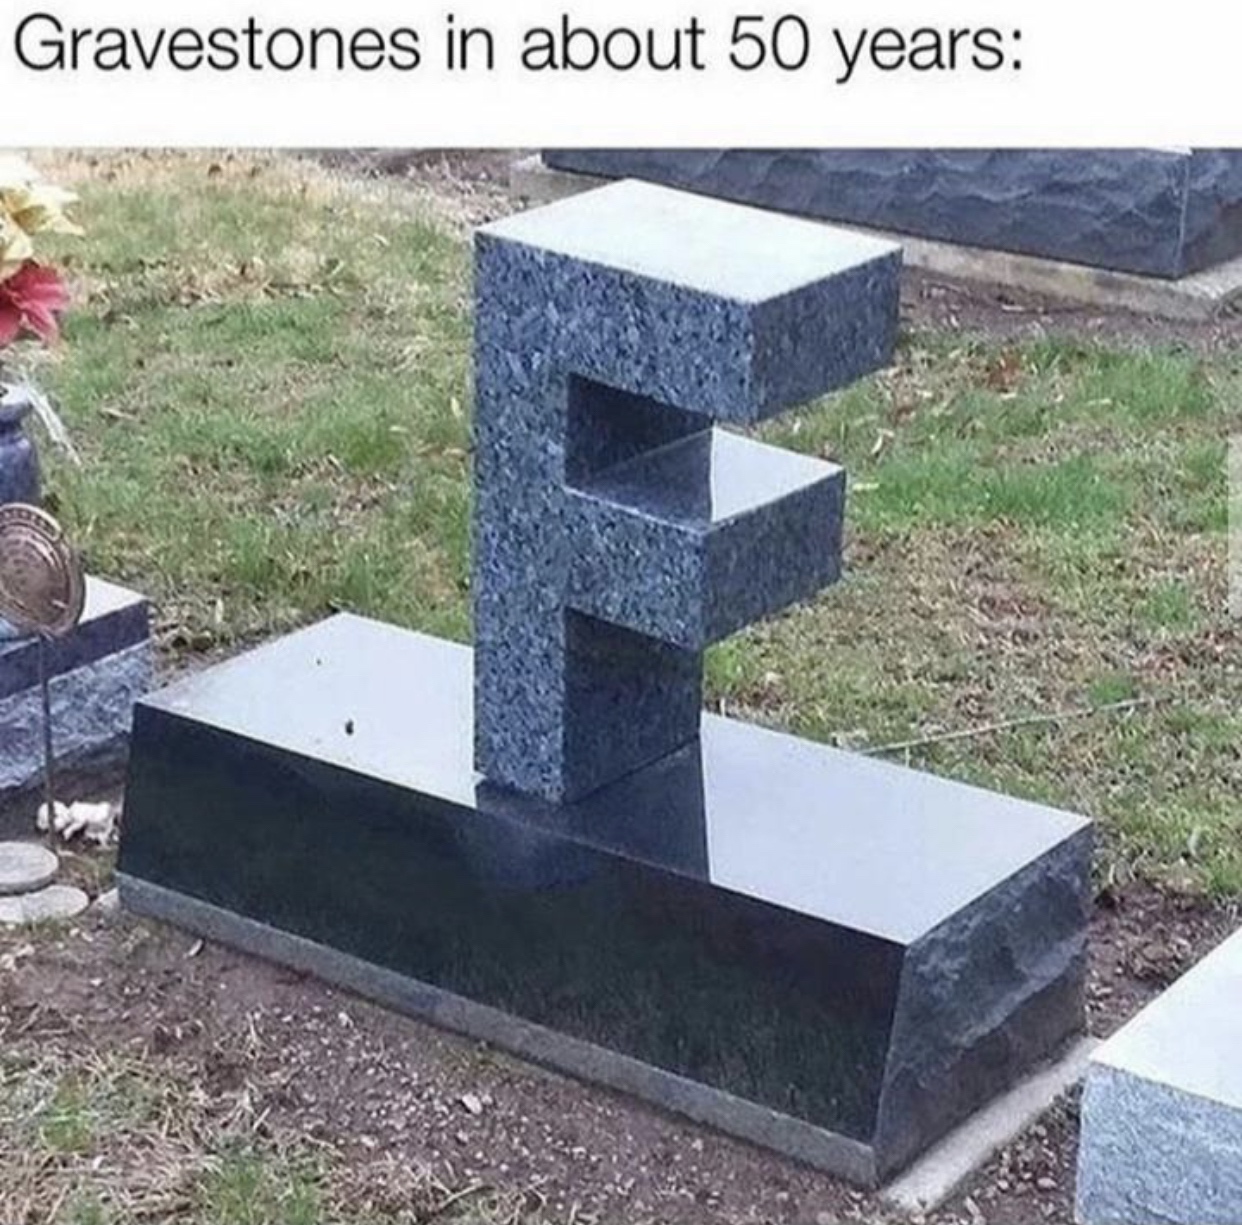 f respect - Gravestones in about 50 years